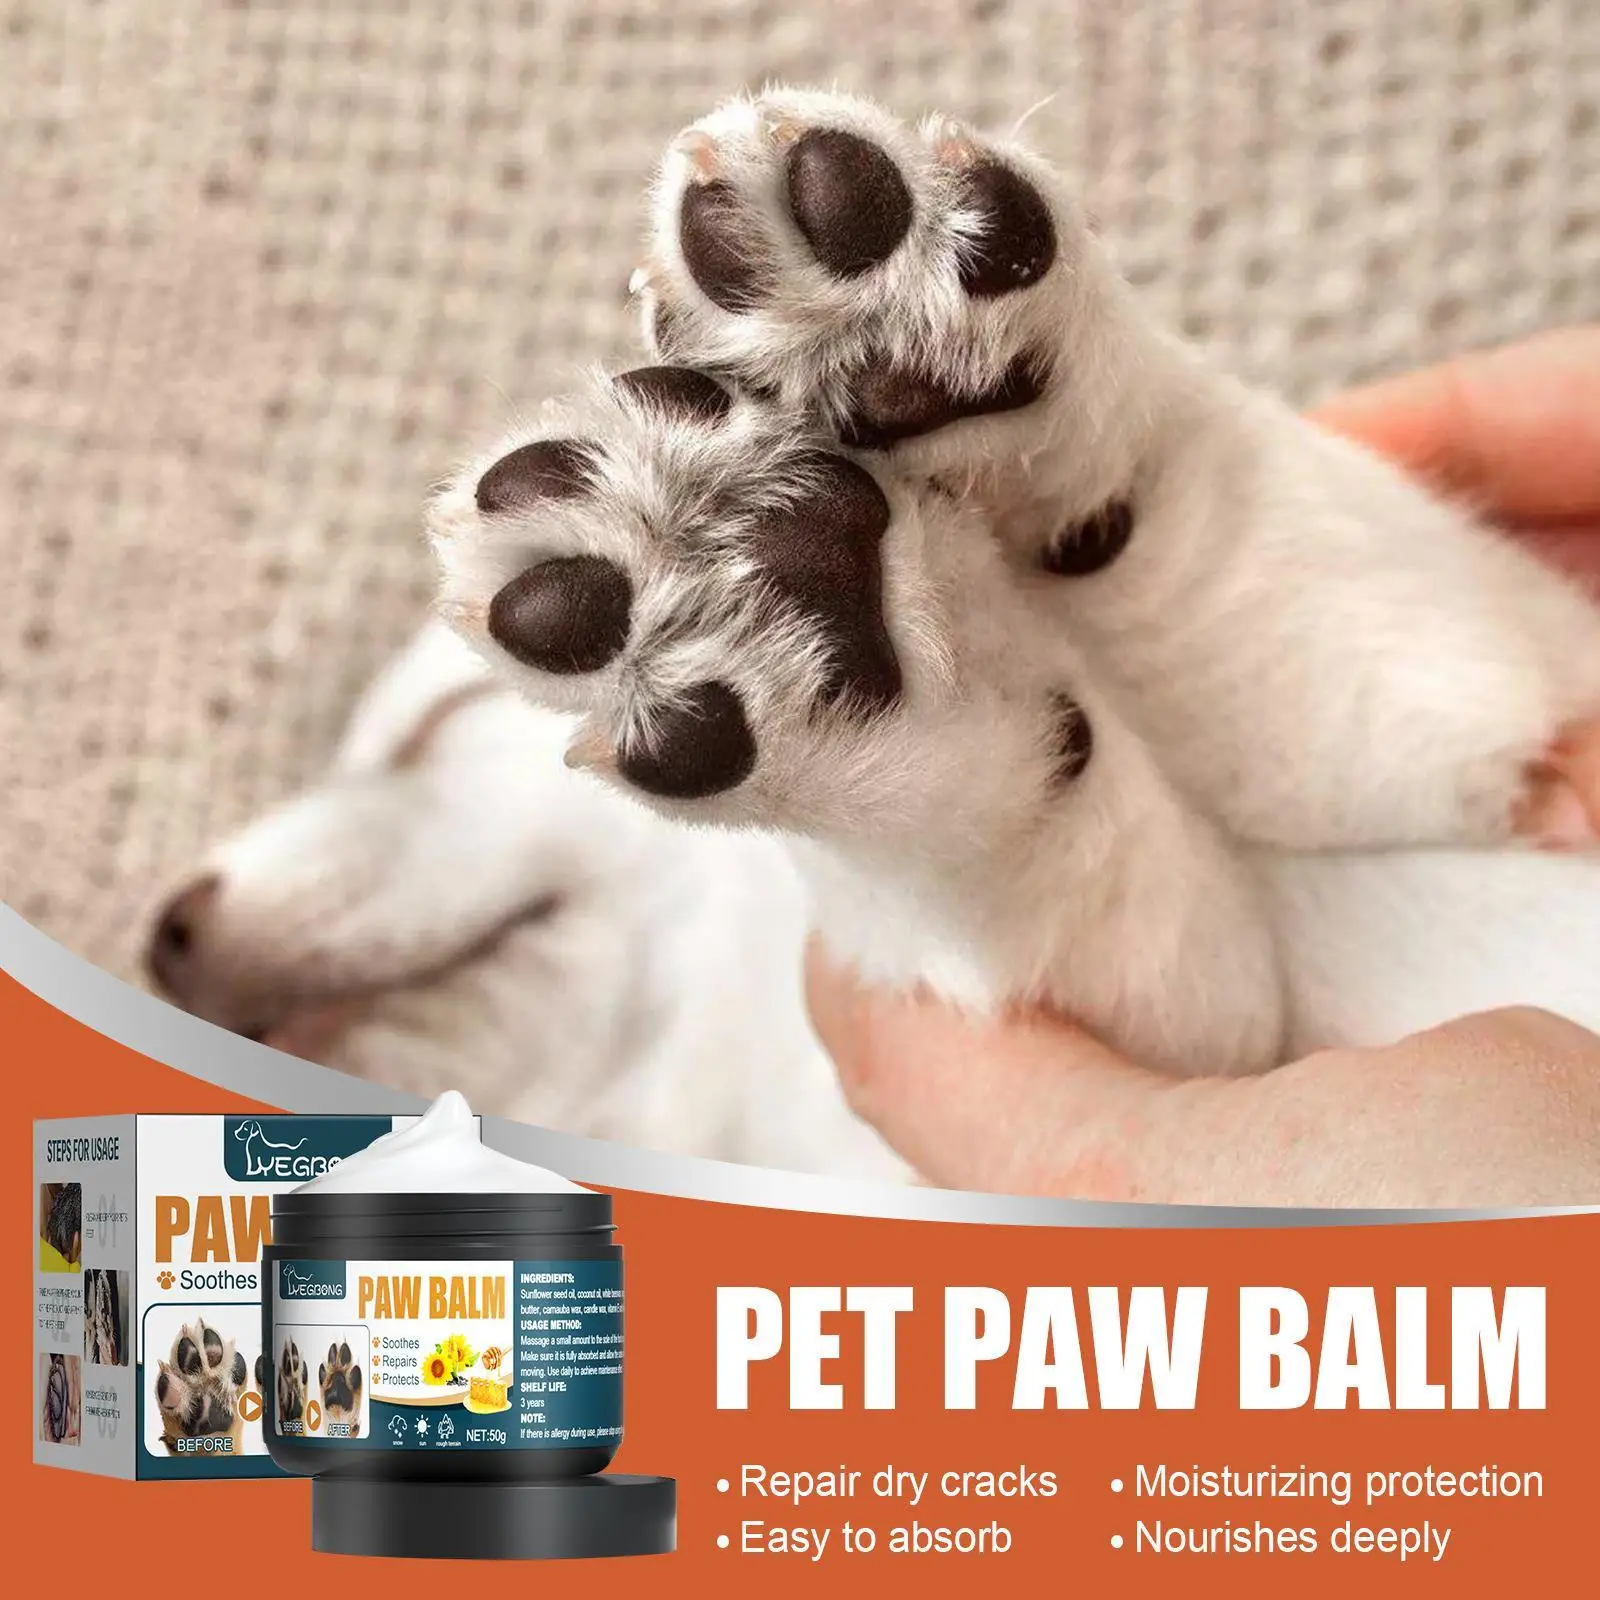 50g Pet Paw Care Cream Healthy Pet Paw Balm Pet Foot Cat Oil Care Pad Wax Dog Balm Foot Protection Paws Balm Care Protectiv K7O9 images - 6